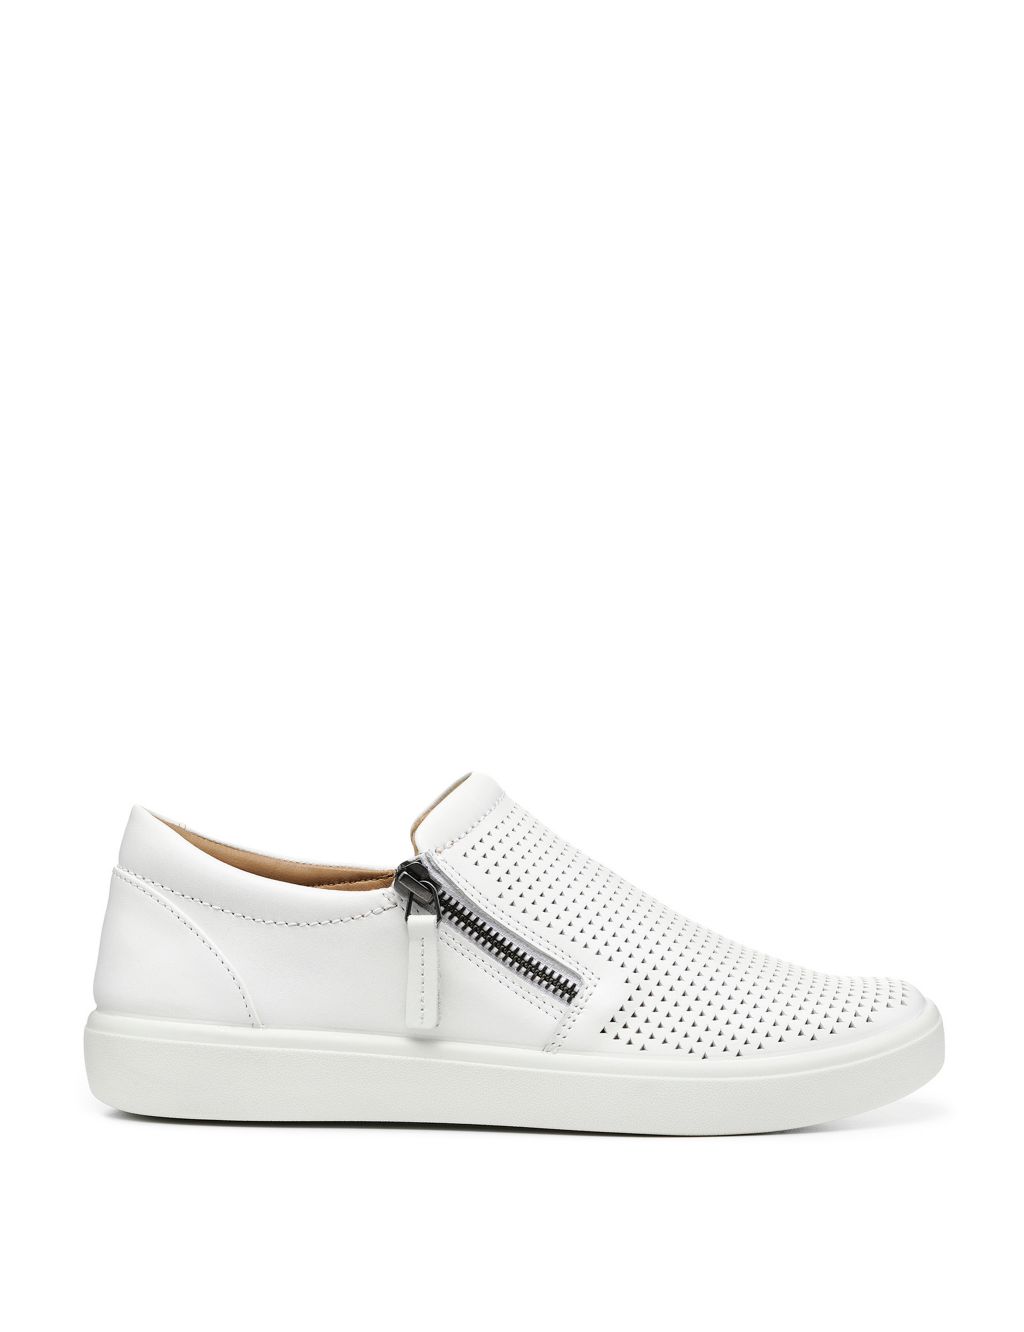 Daisy Wide Fit Leather Flat Boat Shoes 3 of 4